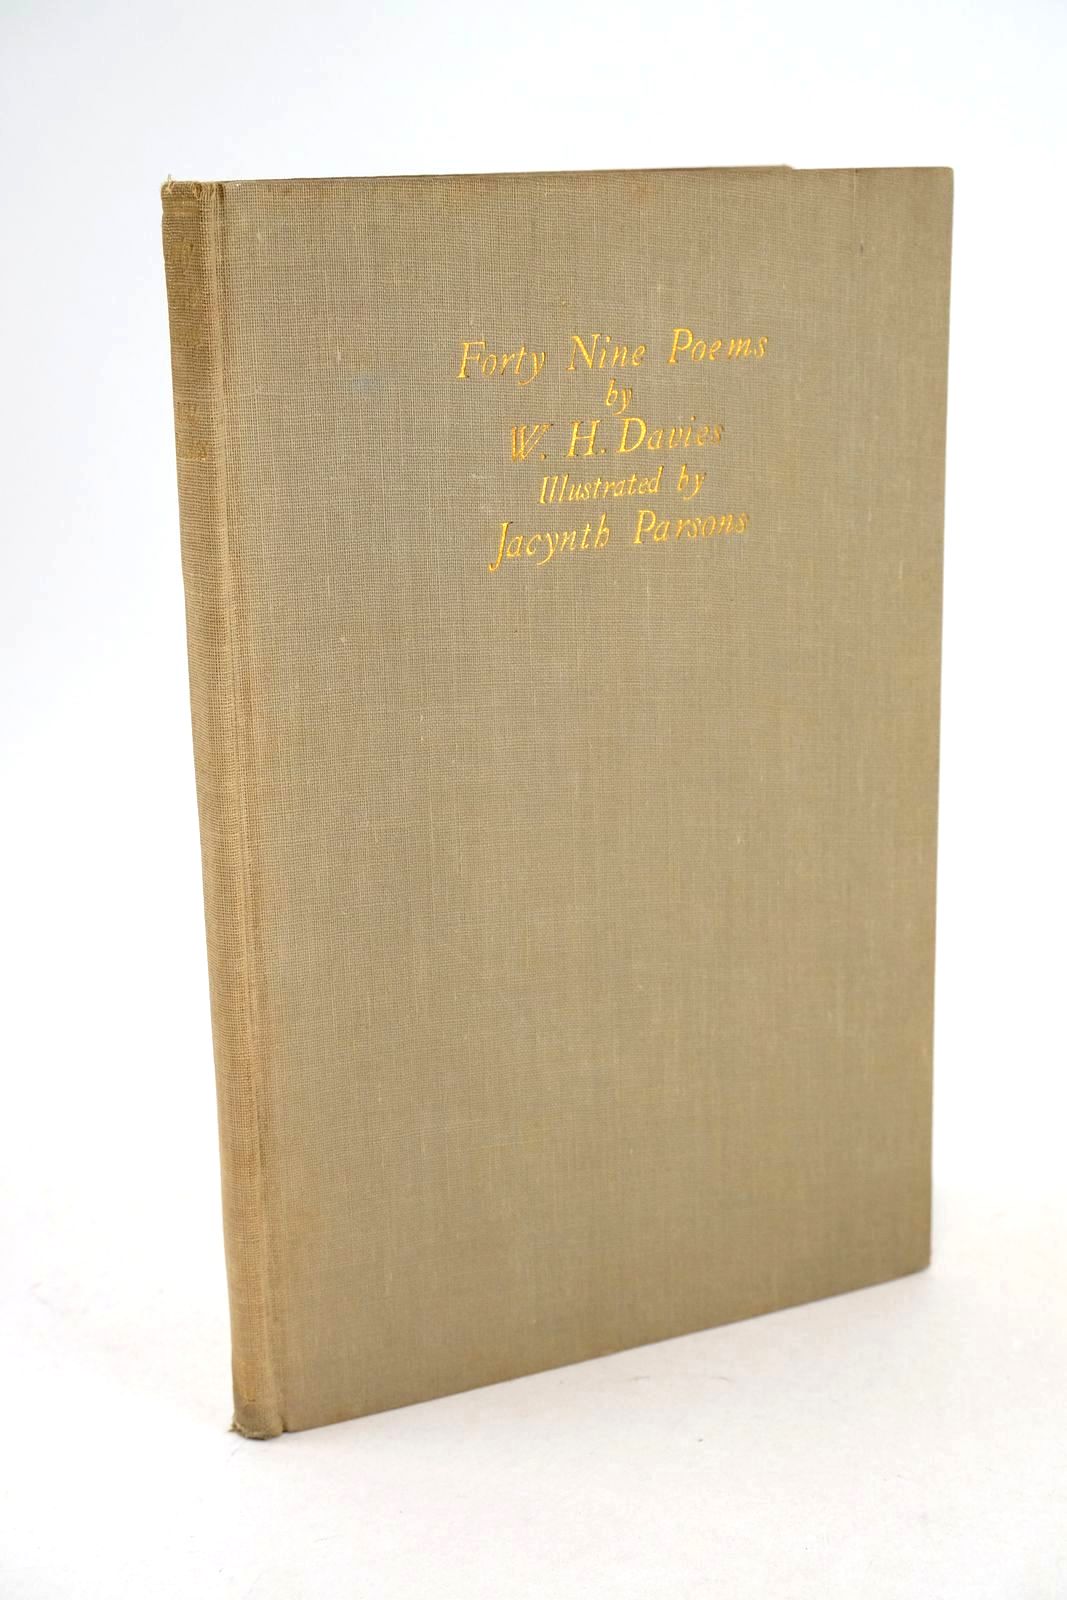 Photo of FORTY-NINE POEMS BY W.H. DAVIES- Stock Number: 1326252